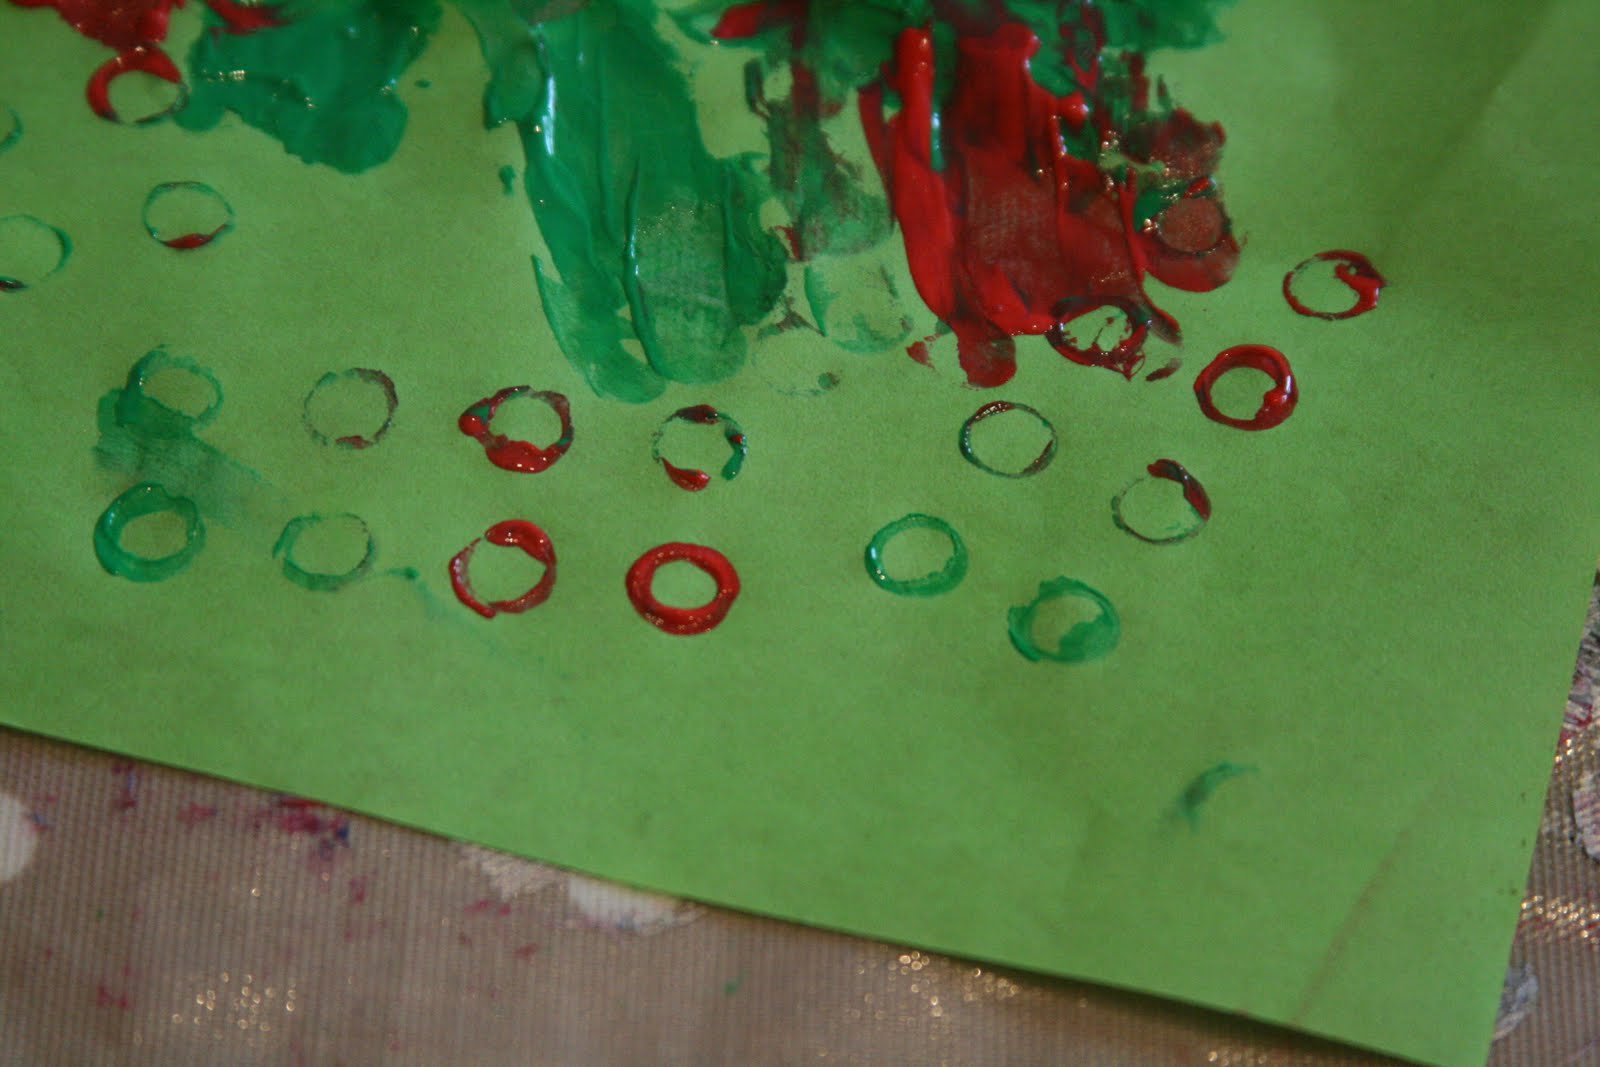 How-to PAINT PAPER like Eric Carle - Process-based lessons - Nature of Art®